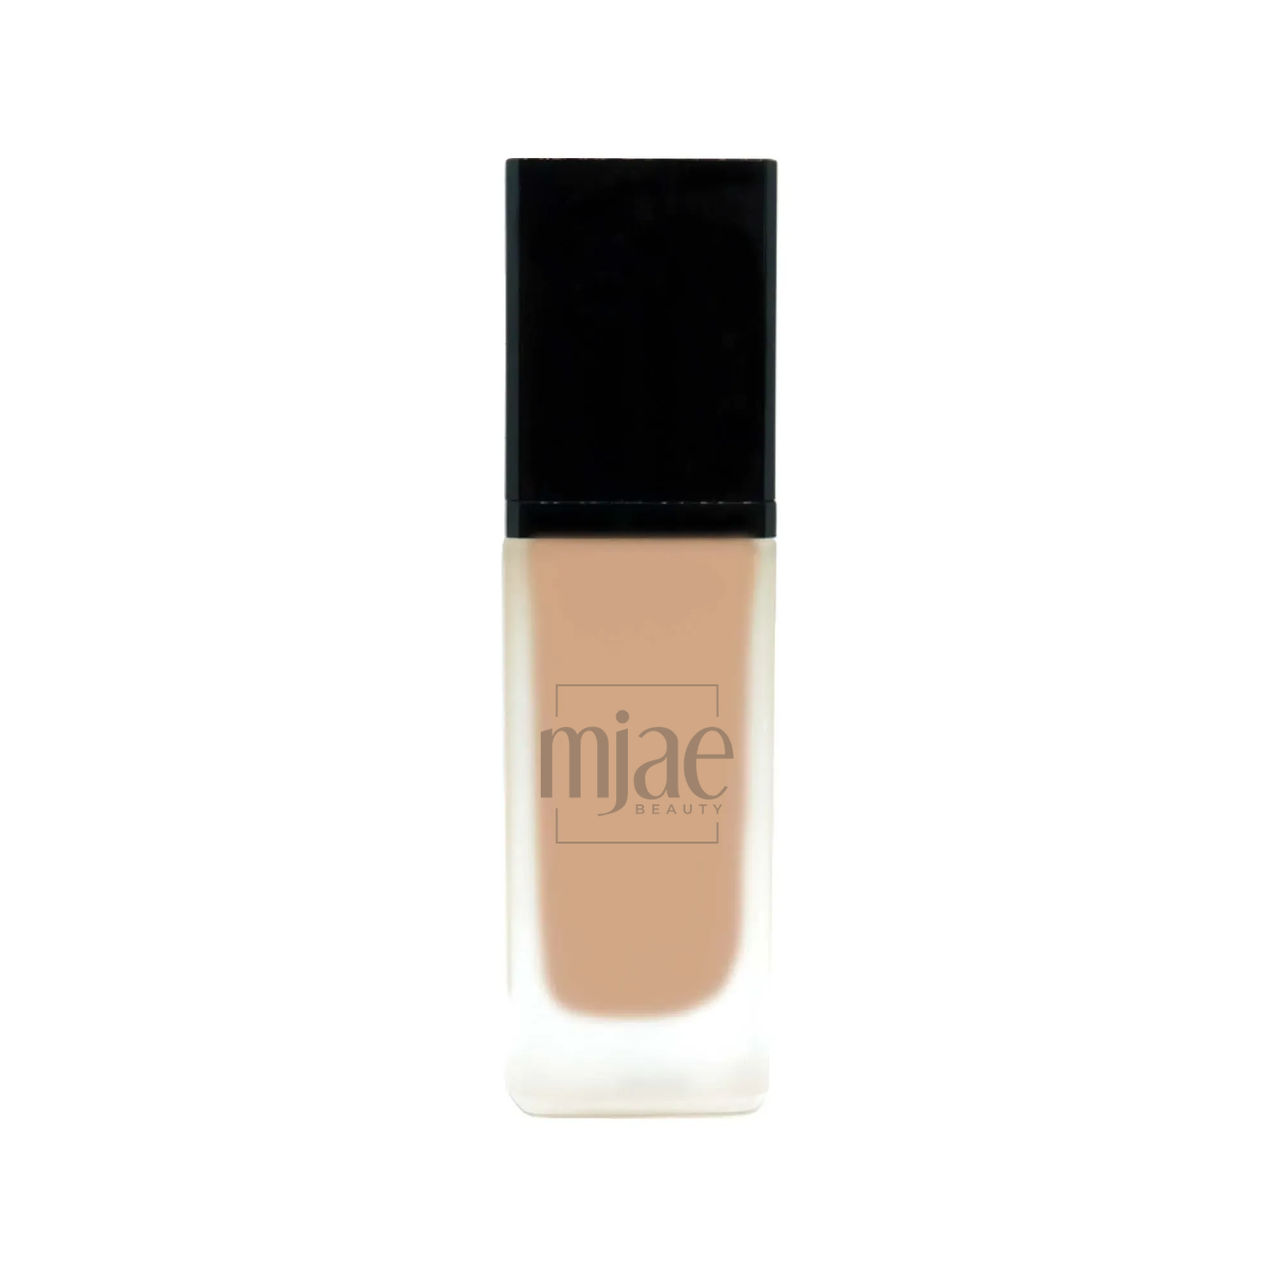 Mjae Foundation with SPF - Penny - Clean Beauty